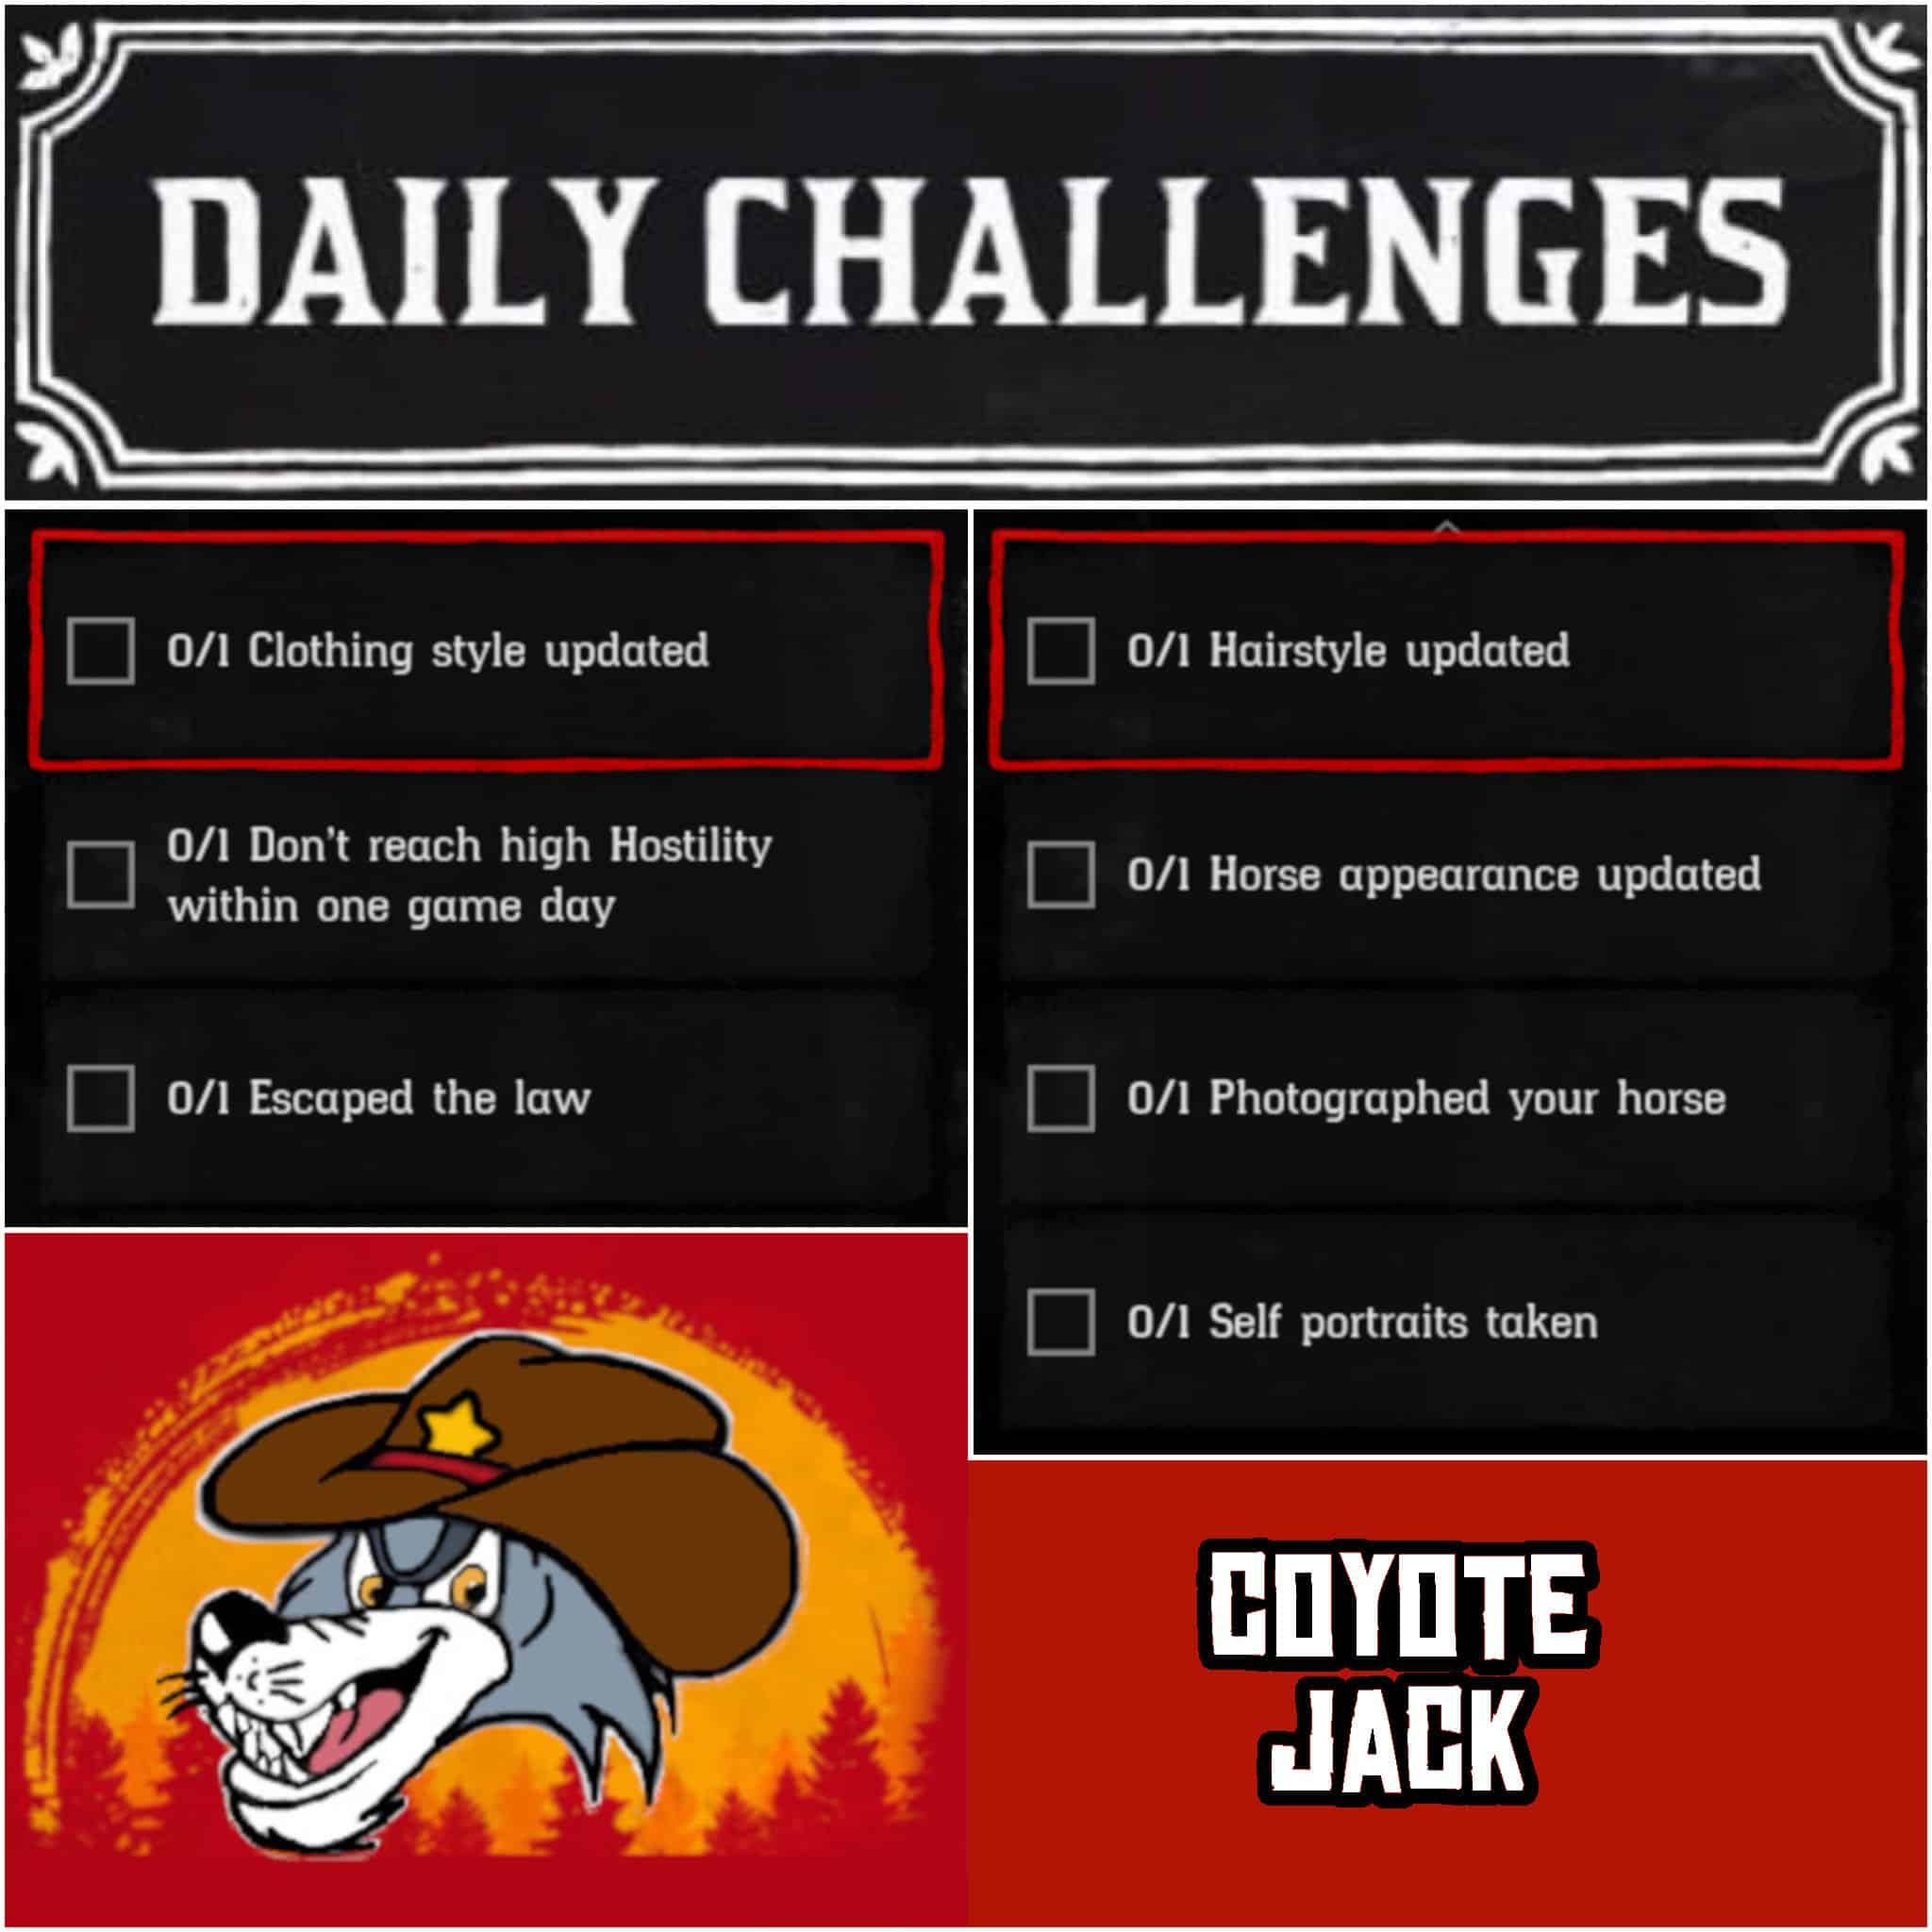 You are currently viewing Friday 01 January Daily Challenges